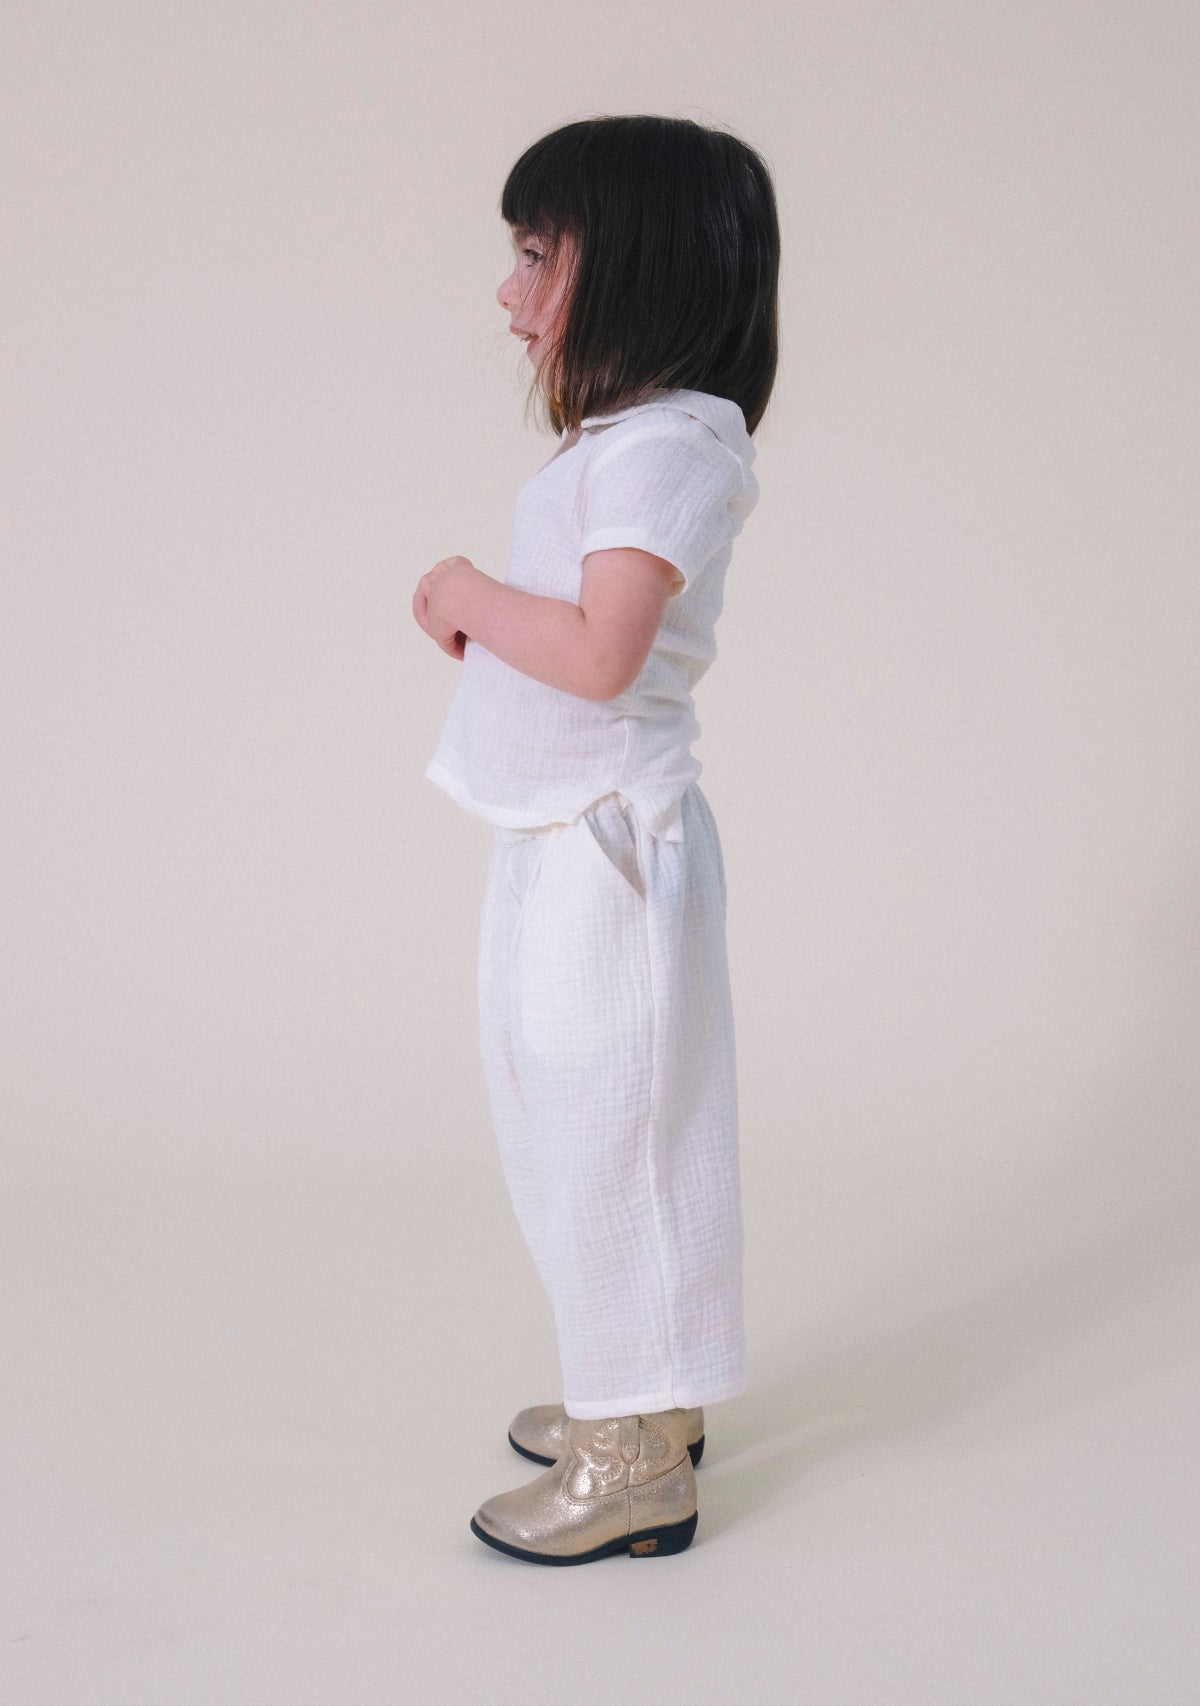 Summer Organic Cotton Gauze Toddler Matching Set in color Ivory, Brown, and Black. Sustainable clothes for toddlers